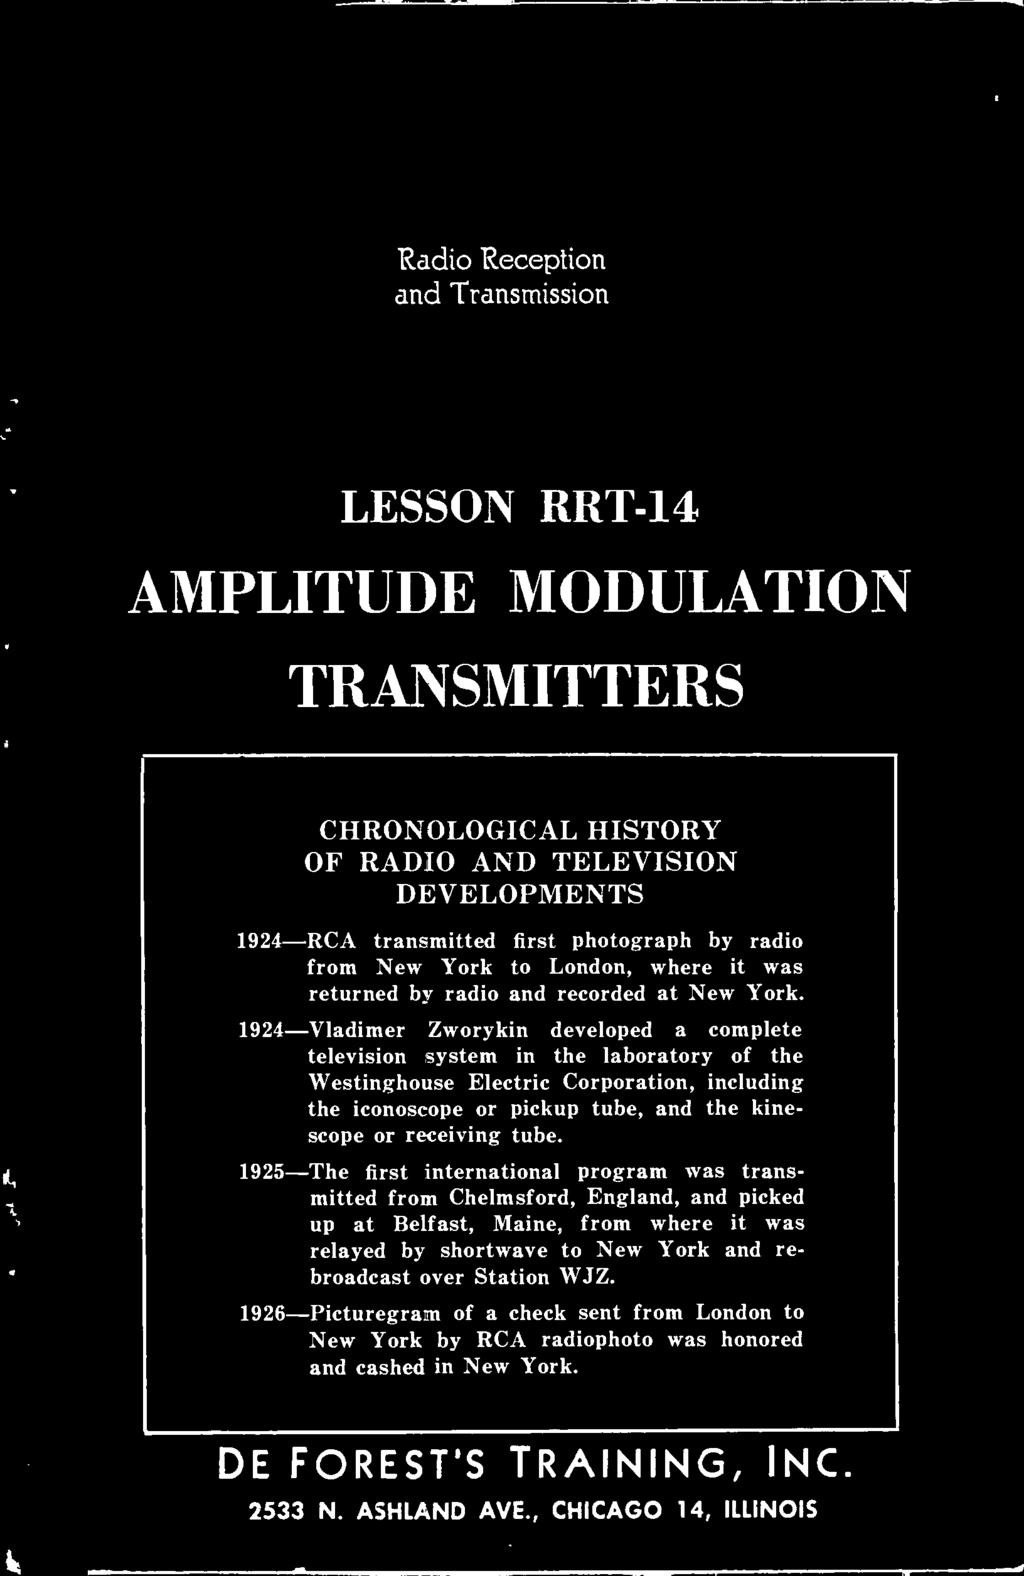 Radio Reception and Transmission LESSON RRT -14 AMPLITUDE MODULATION TRANSMITTERS CHRONOLOGICAL HISTORY OF RADIO AND TELEVISION DEVELOPMENTS 1924 -RCA transmitted first photograph by radio from New